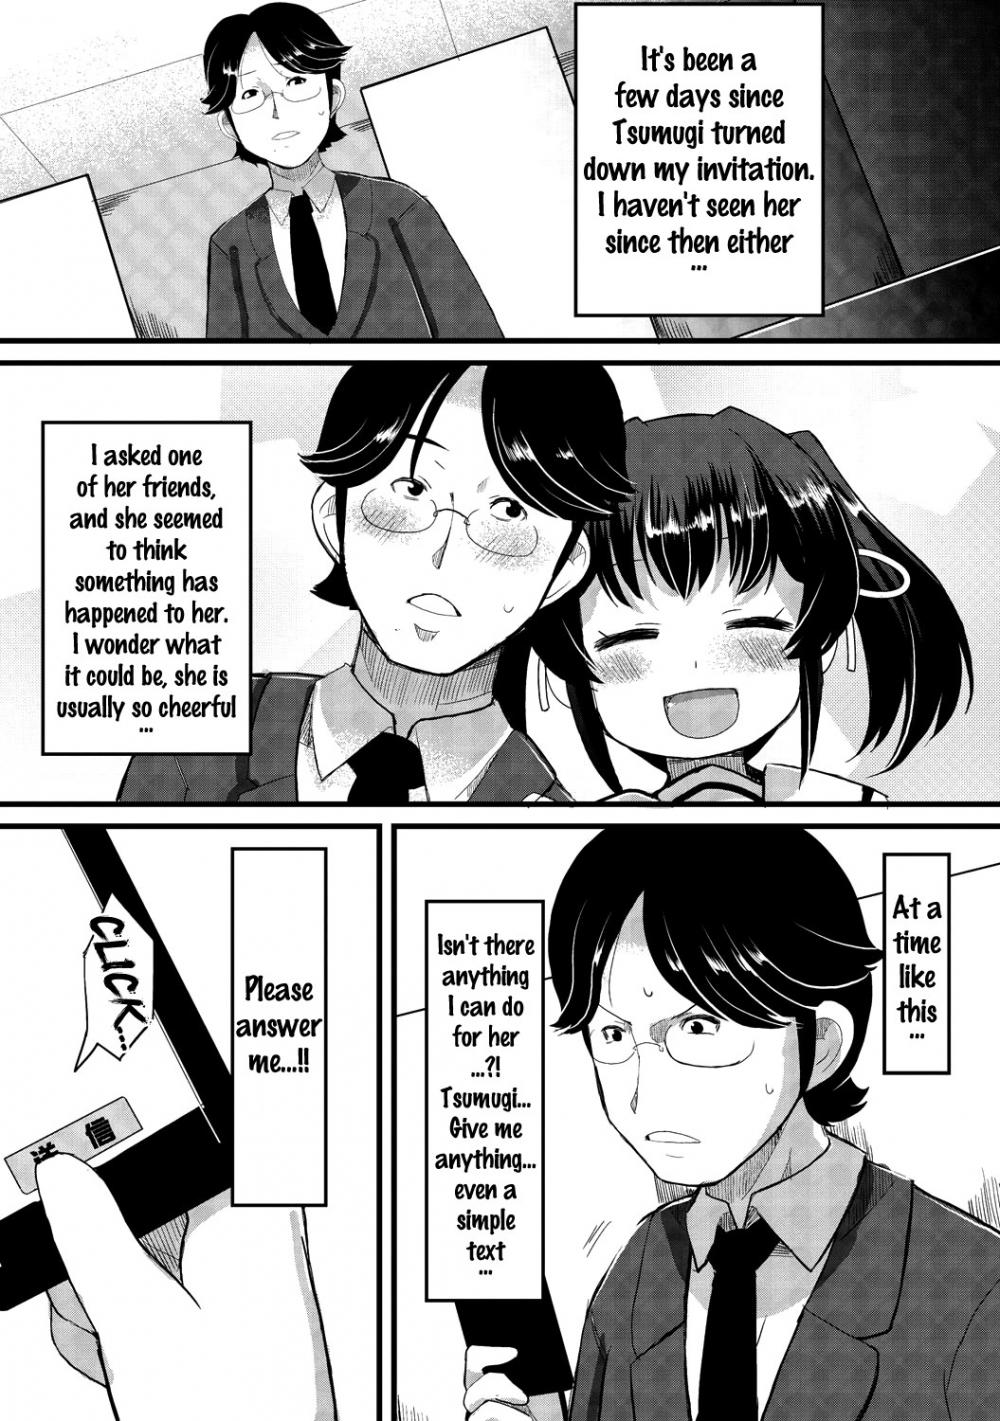 Hentai Manga Comic-A Large Breasted Honor Student Makes The Big Change to Perverted Masochist-Chapter 4-1